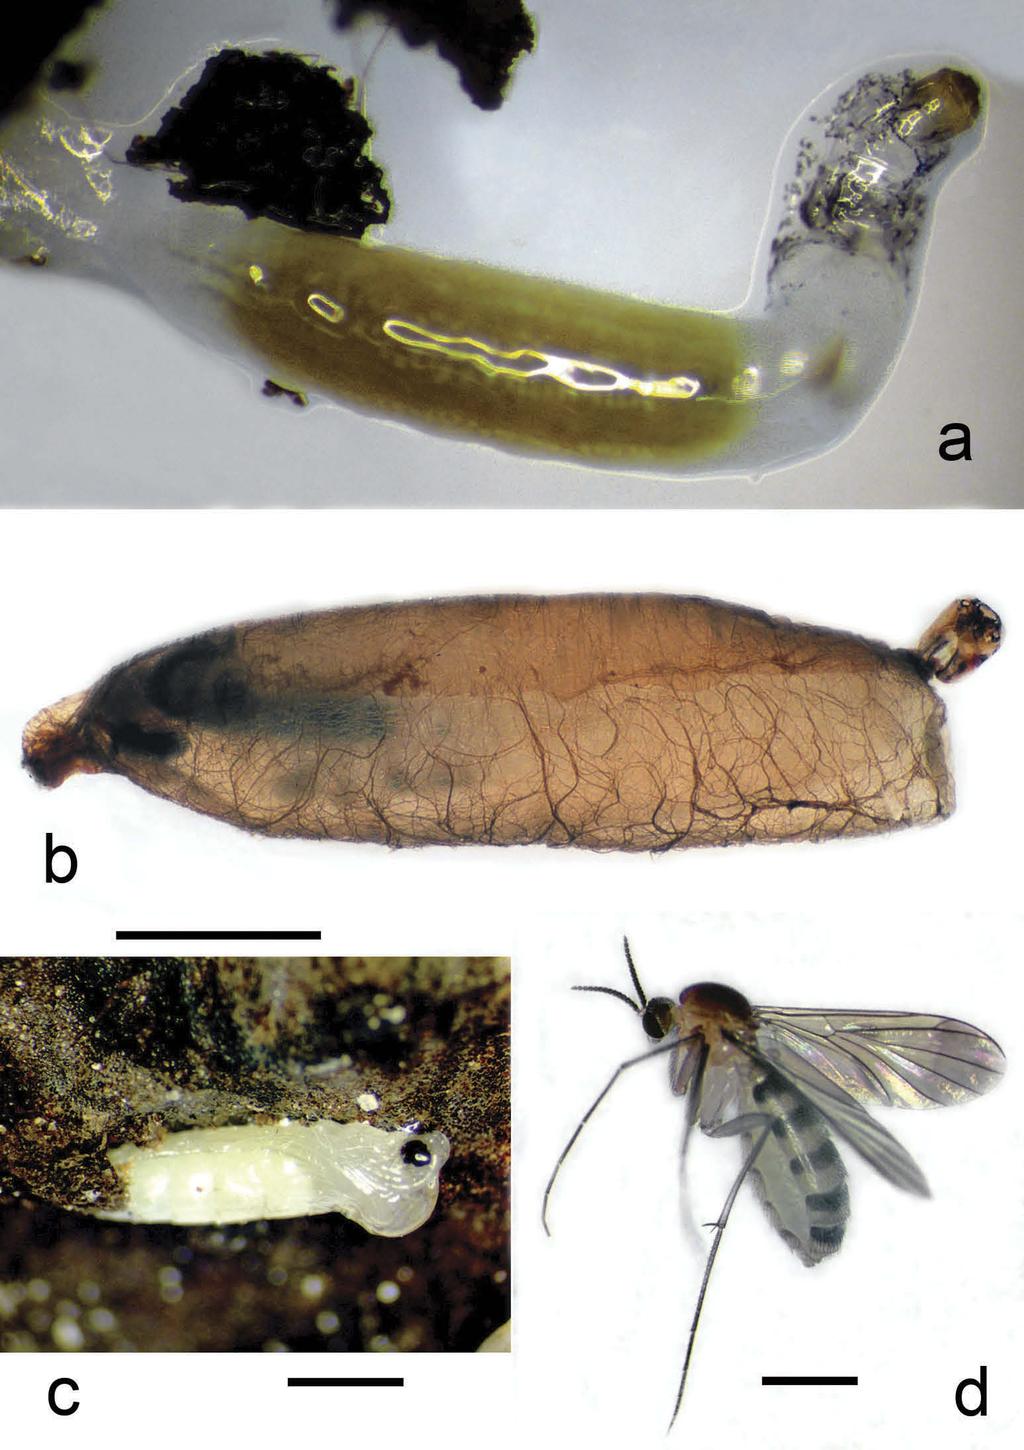 JOURNAL OF NATURAL HISTORY 91 Figure 3. (a) Keroplatid larva parasitized by Megastylus woelkei sp. nov., inside the keroplatid larva the larva of M. woelkei is visible; (b) cocoon of M. woelkei sp. nov. from which the adult wasp has already emerged, scale bar 1.